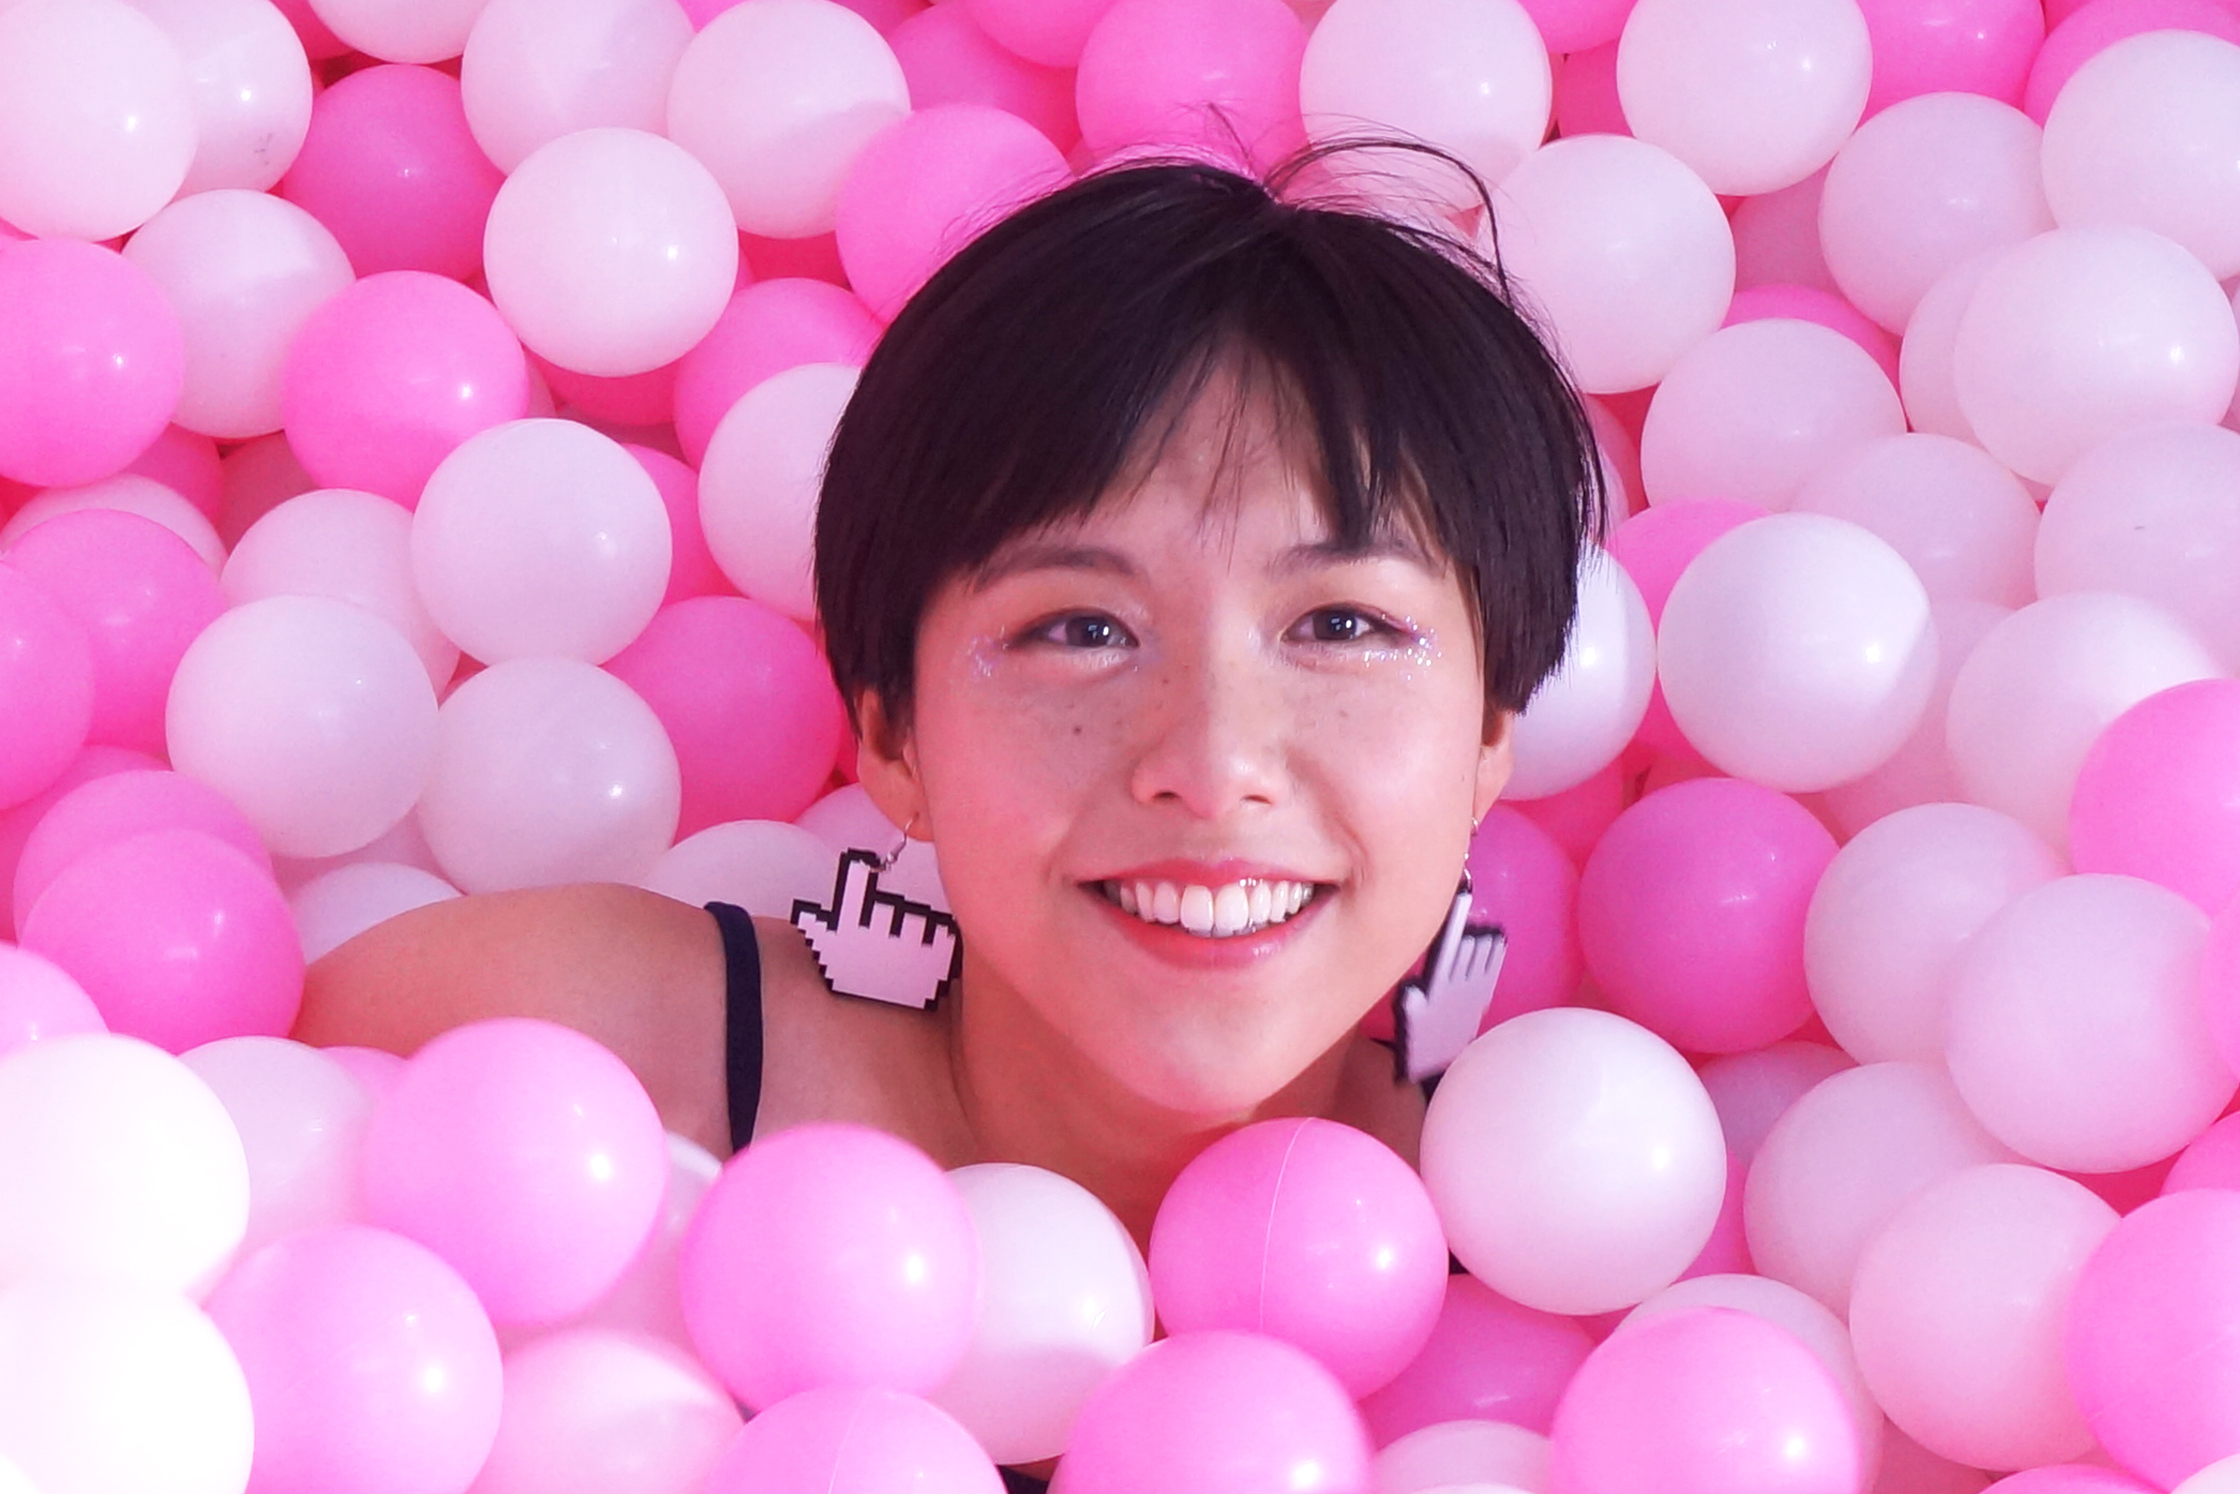 The work of Hong Kong conceptual artist Mak2 addresses everything from shifting socio-political environments to new technology. She tells Helen Dalley about changing her name, doing stand-up, and creating her first sitcom.